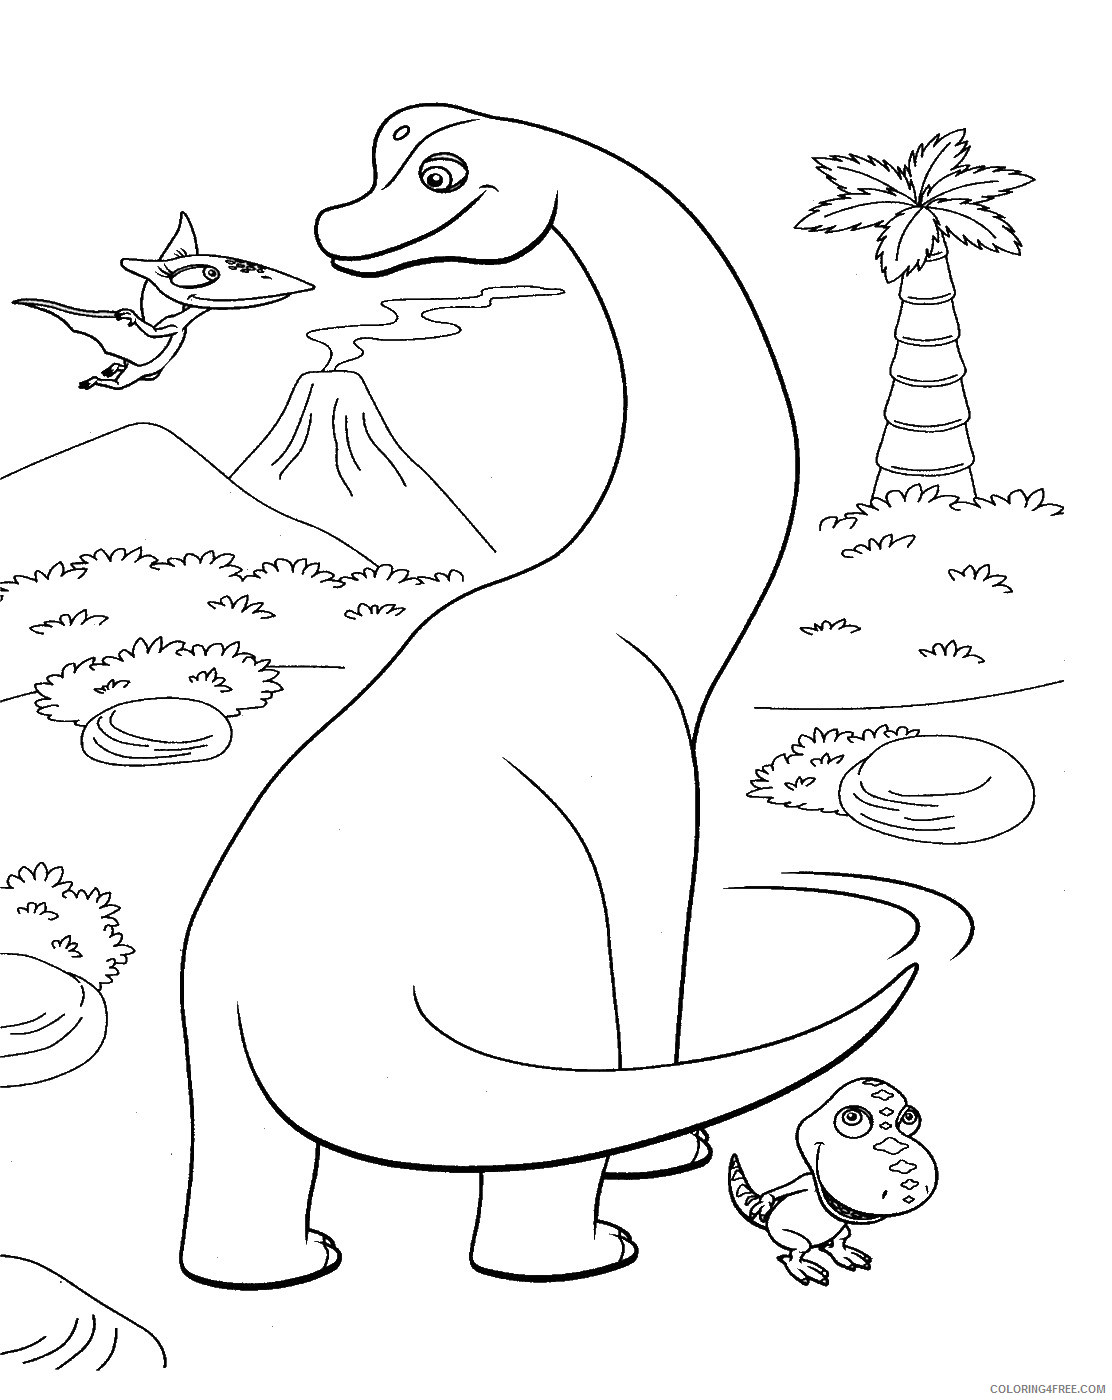 Dinosaur Train Coloring Pages Cartoons dino_train_cl_13 Printable 2020 2234 Coloring4free